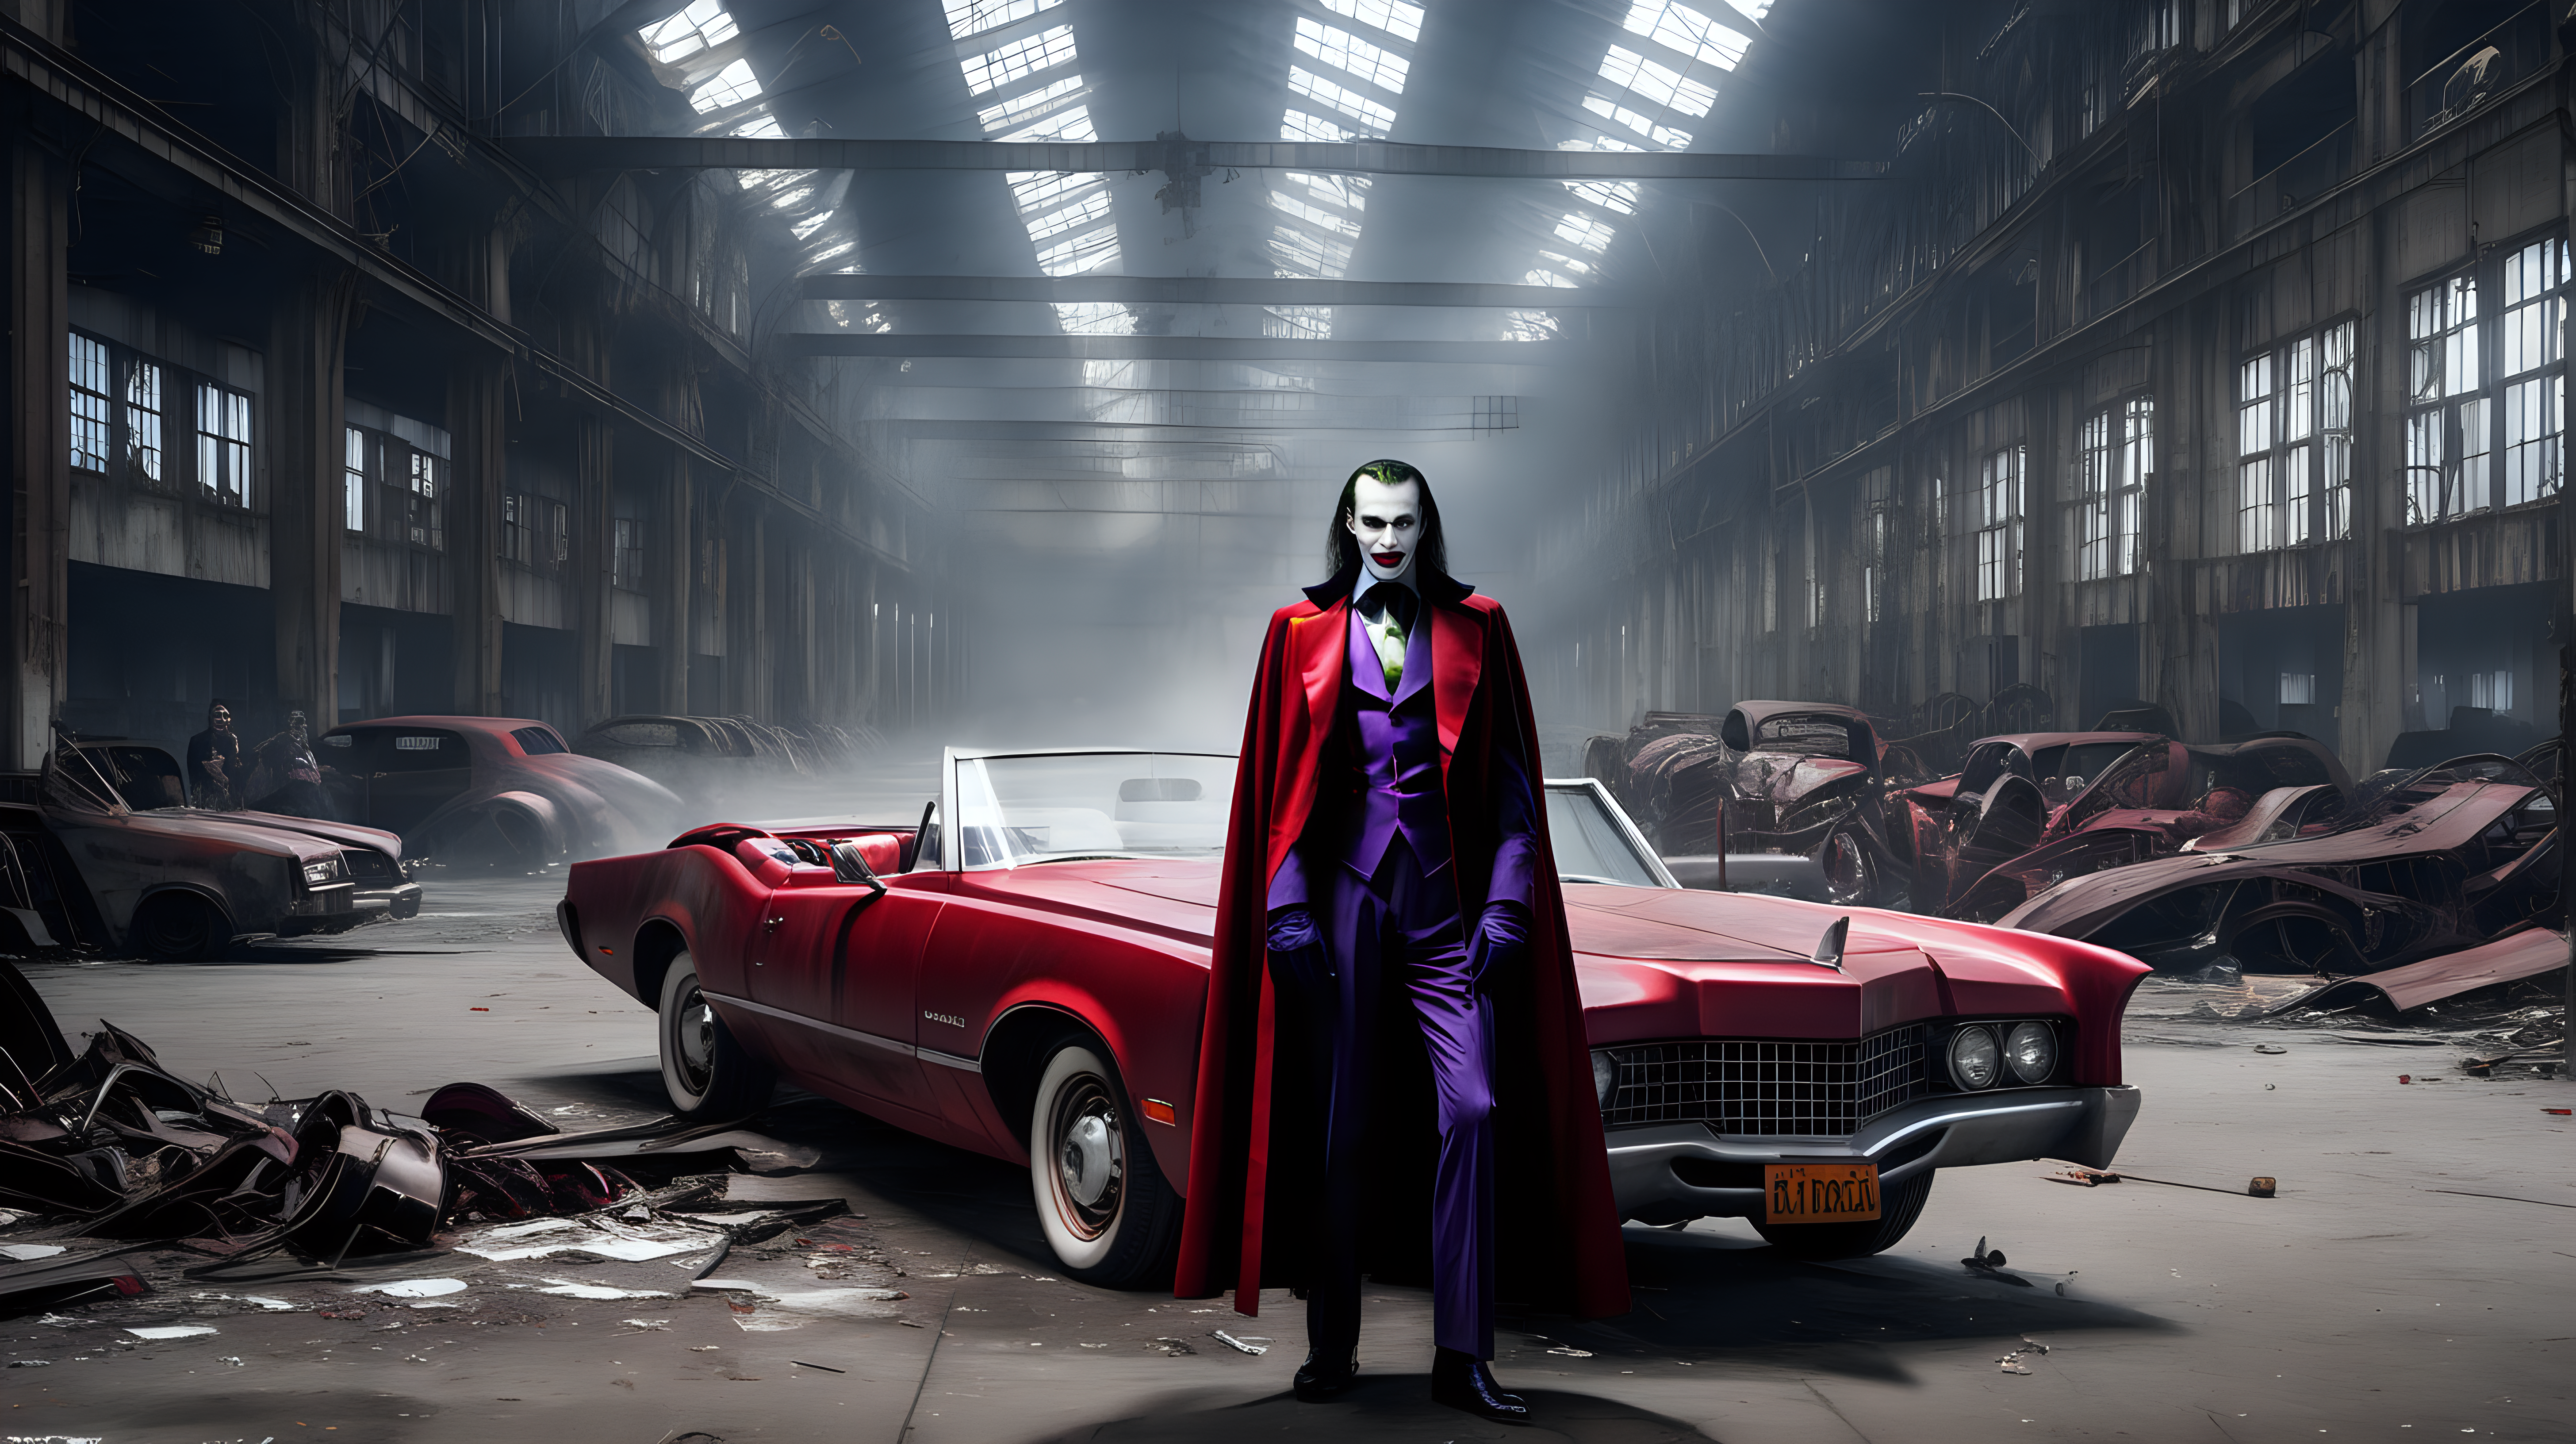 Dracula fights the joker in an abandoned car